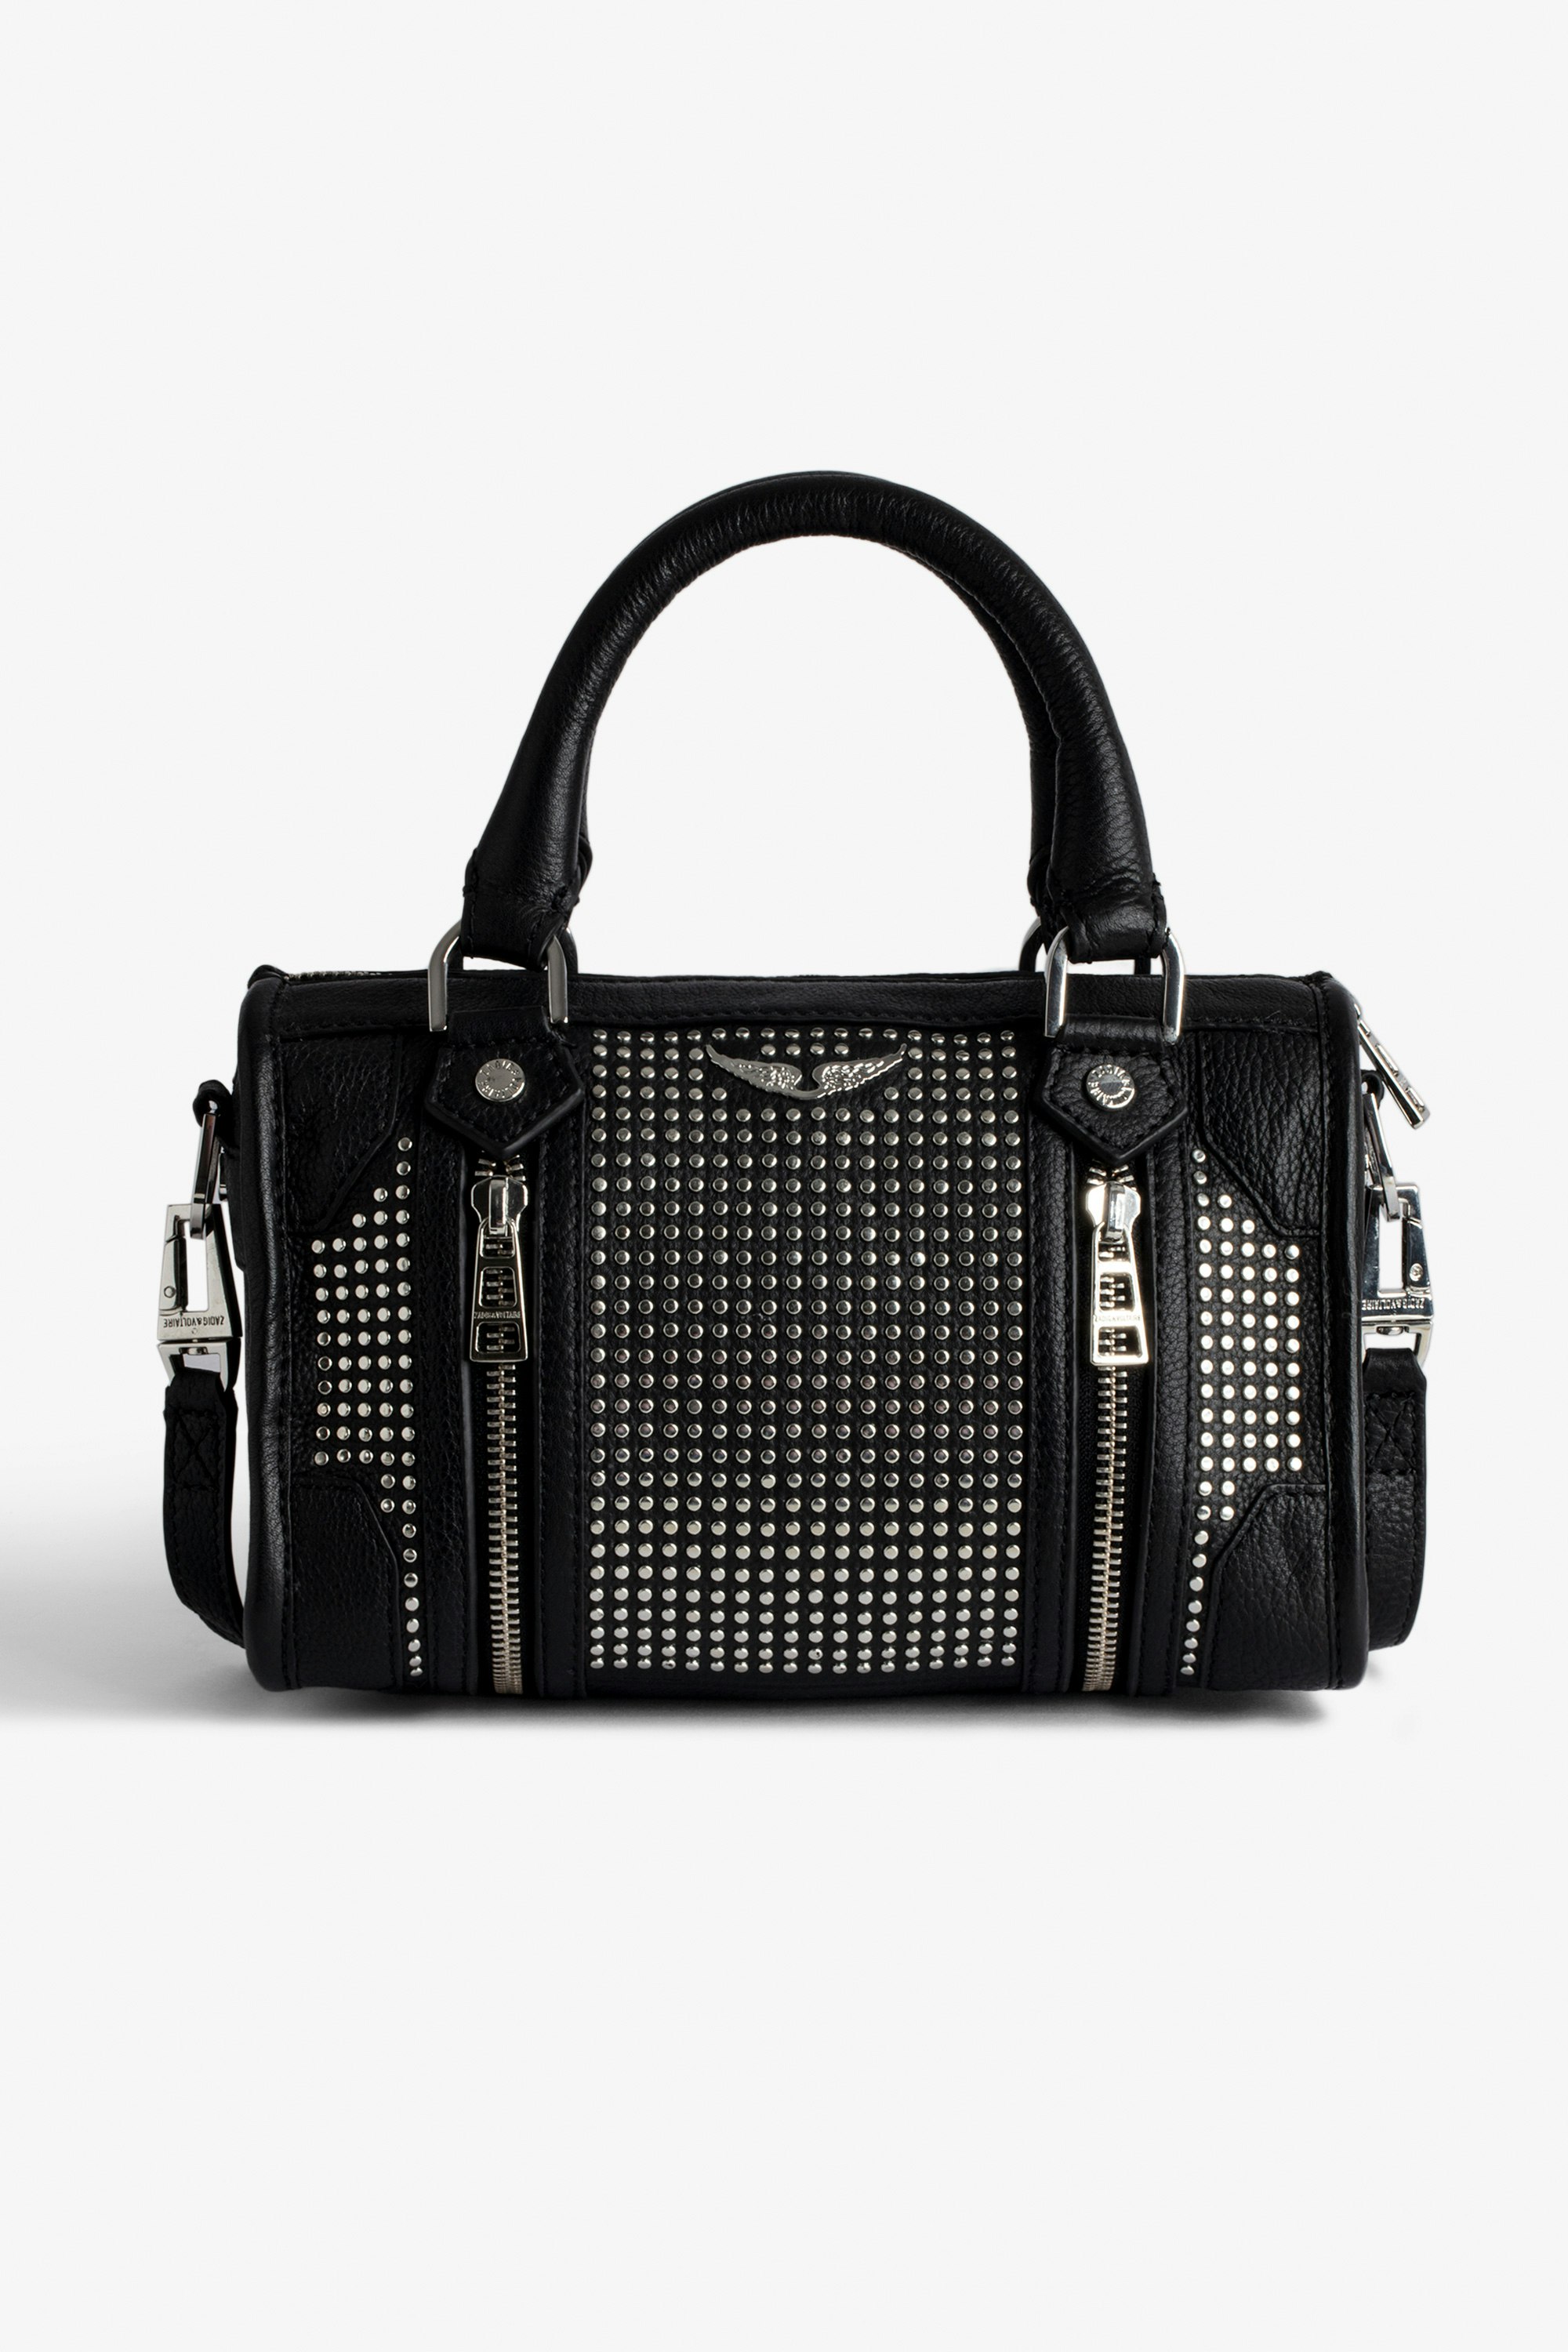 XS Sunny #2 Bag - Women’s small zipped bag in black leather with studs and a shoulder strap.